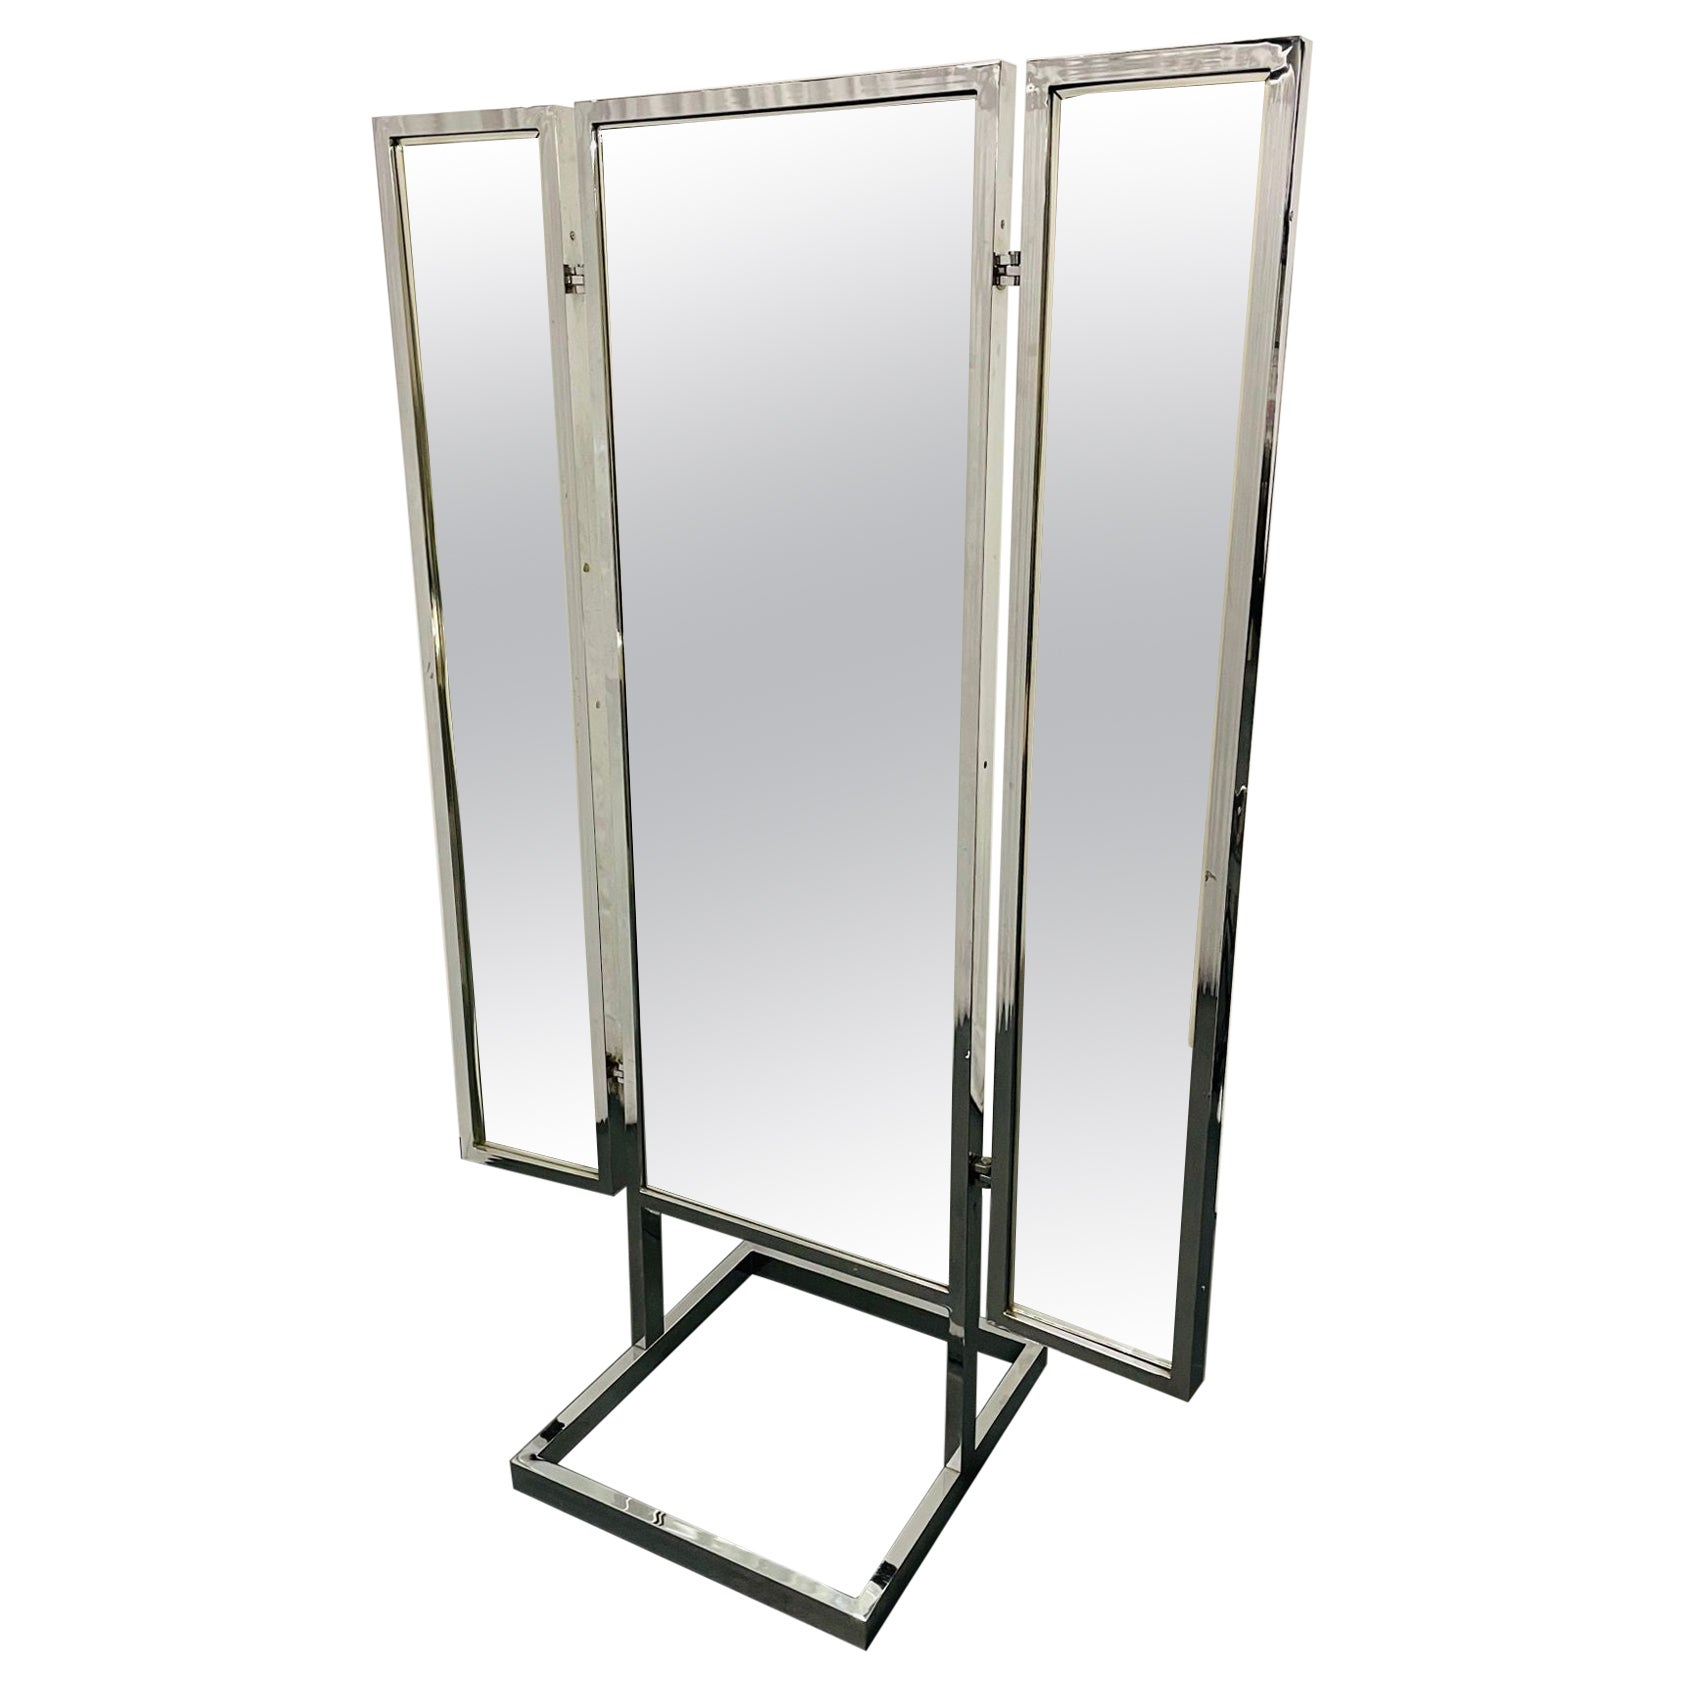 A Mid Century Modern Trifold Cheval Mirror, Steel and Chrome Framed, Reversable For Sale